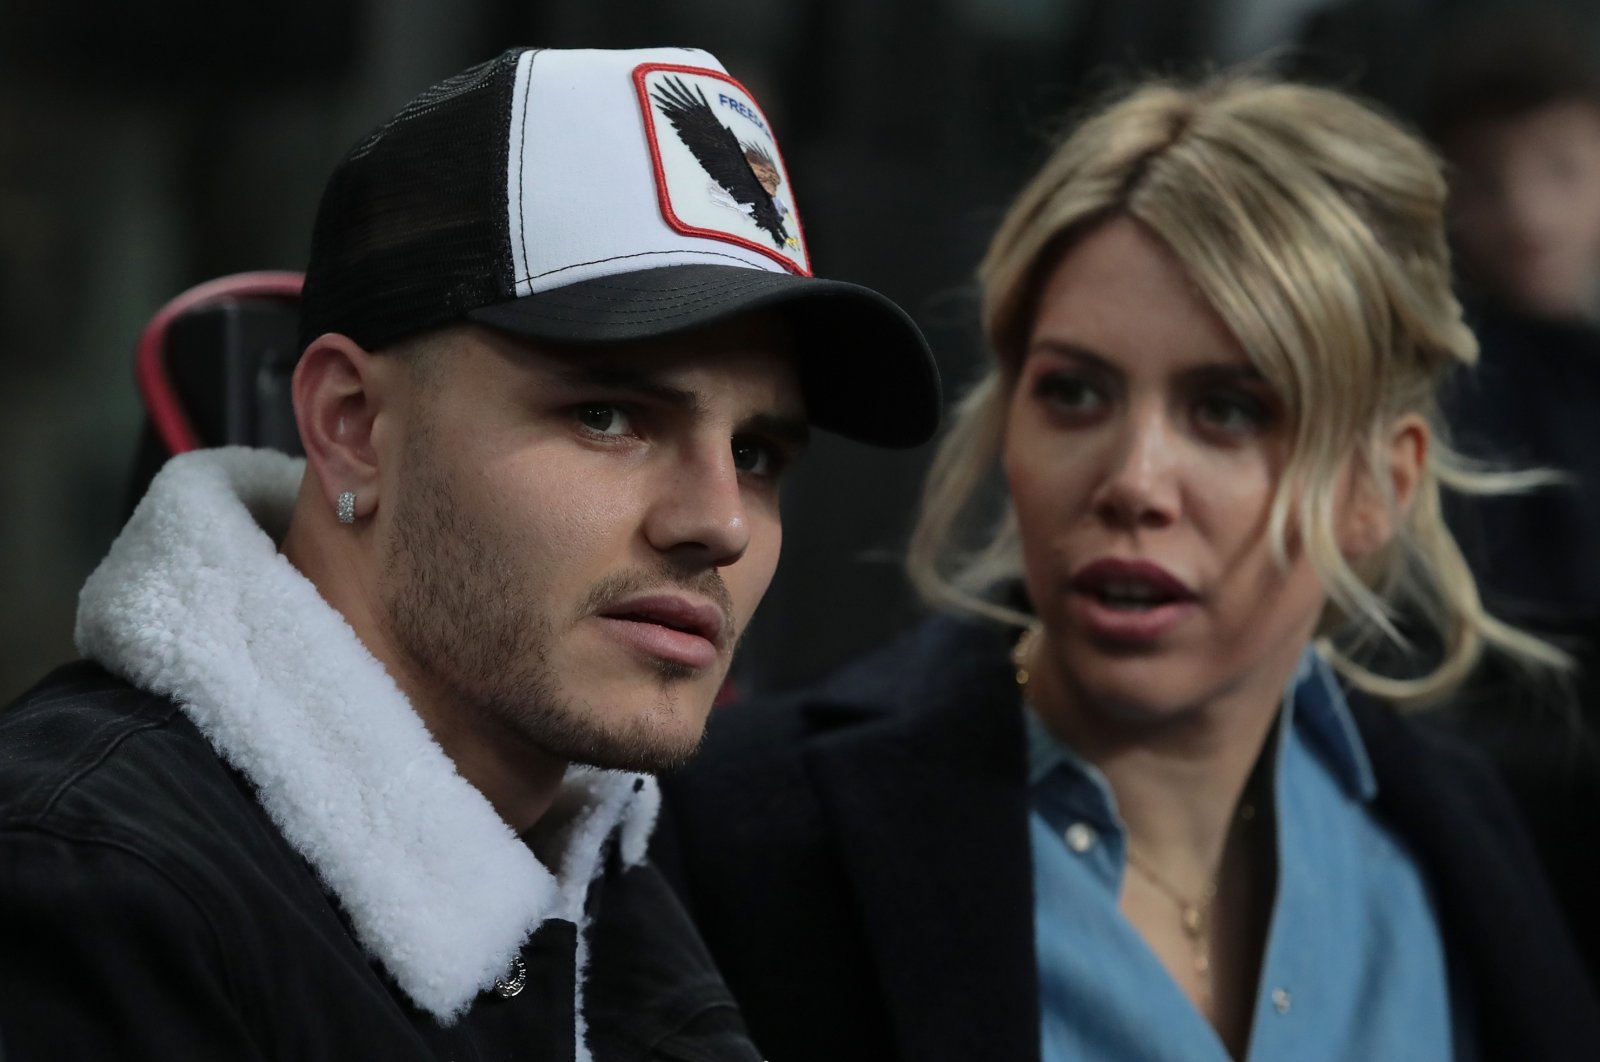 Mauro Icardi (L) and his wife Wanda Nara attend the UEFA Europa League Round of 32 Second Leg match between Inter Milan and SK Rapid Wien at San Siro, Milan, Italy, Feb. 21, 2019.  (Getty Images Photo)